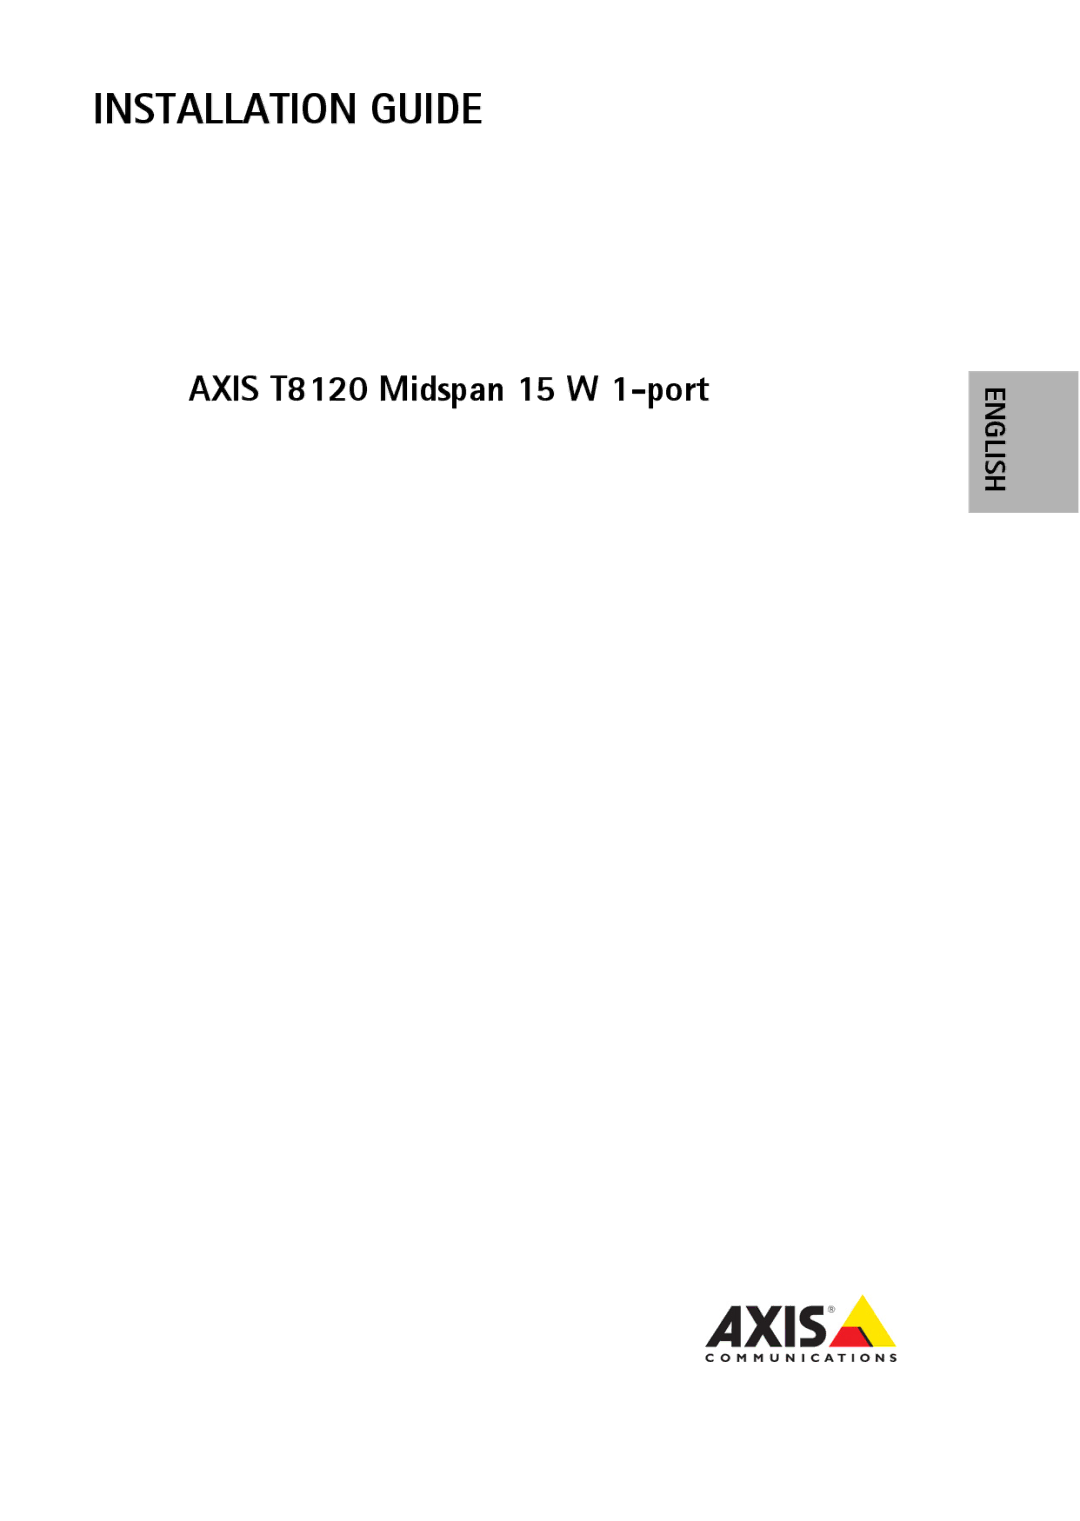 Axis Communications AXIS T8120 manual Installation Guide, Axis T8120 Midspan 15 W 1-port 